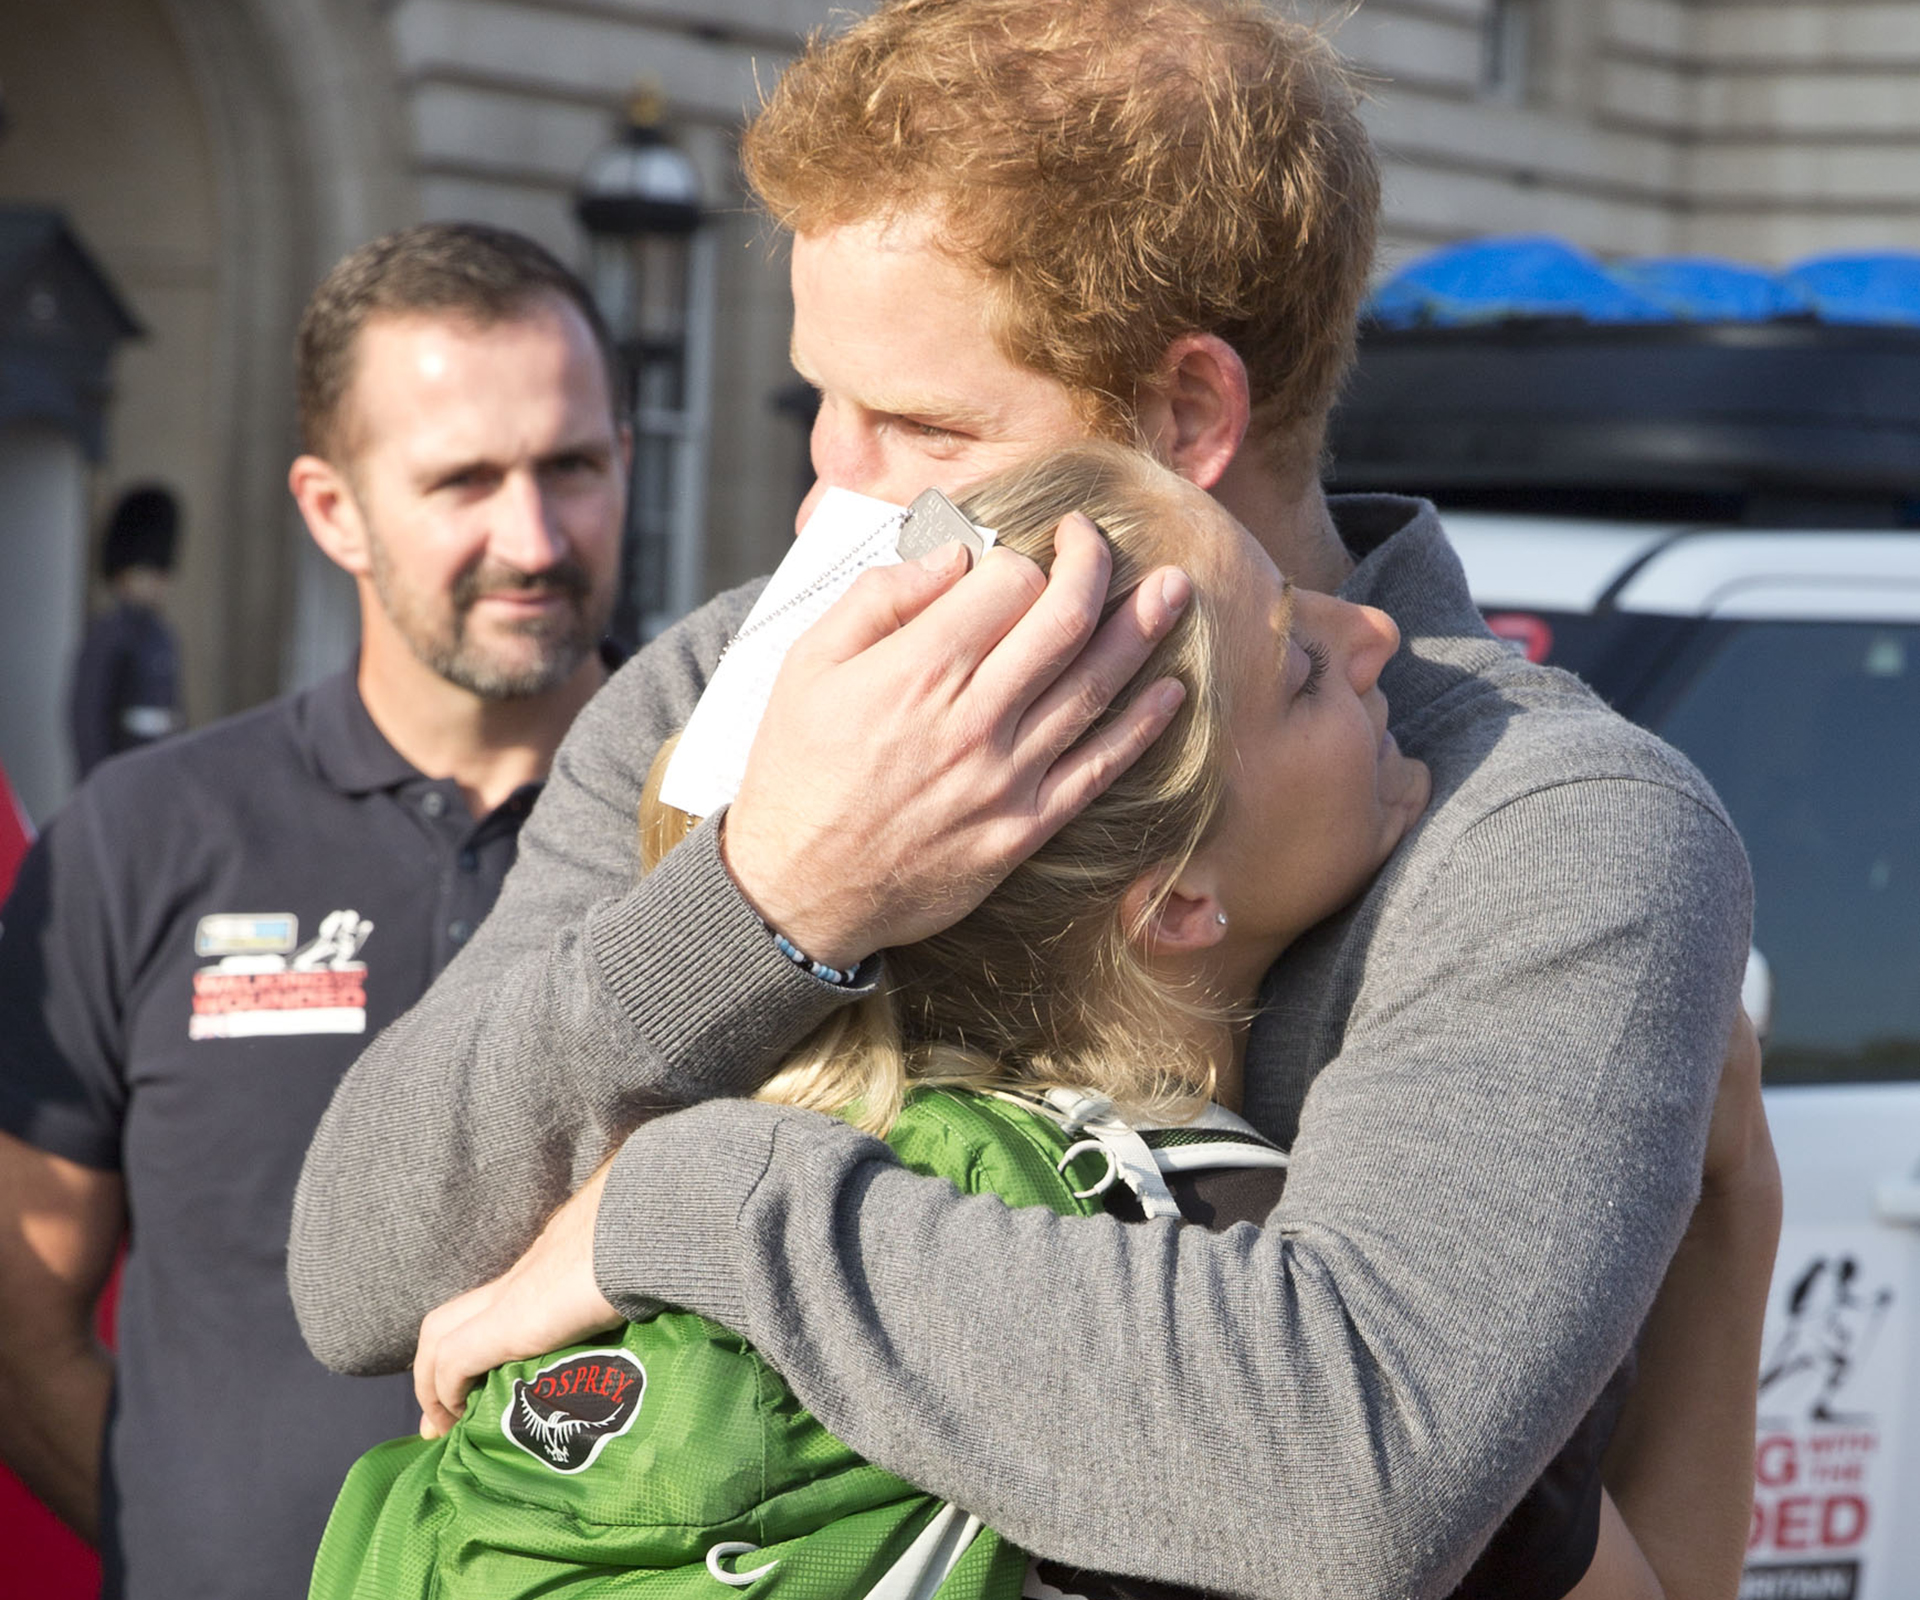 ‘Humbled’ Prince Harry shares emotional moment with injured veteran